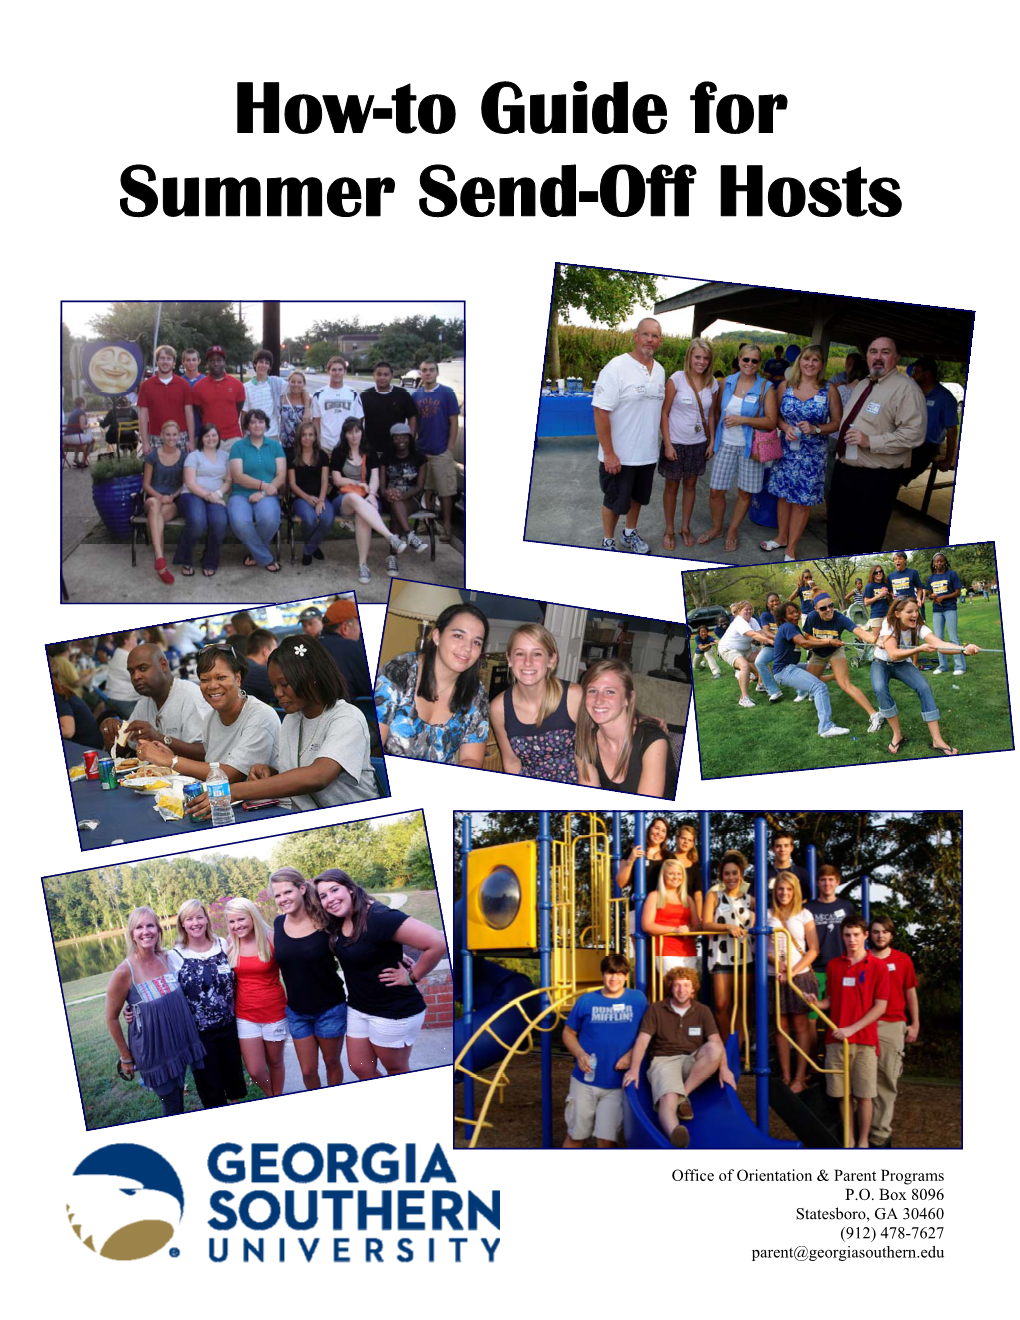 How-To Guide for Summer Send-Off Hosts